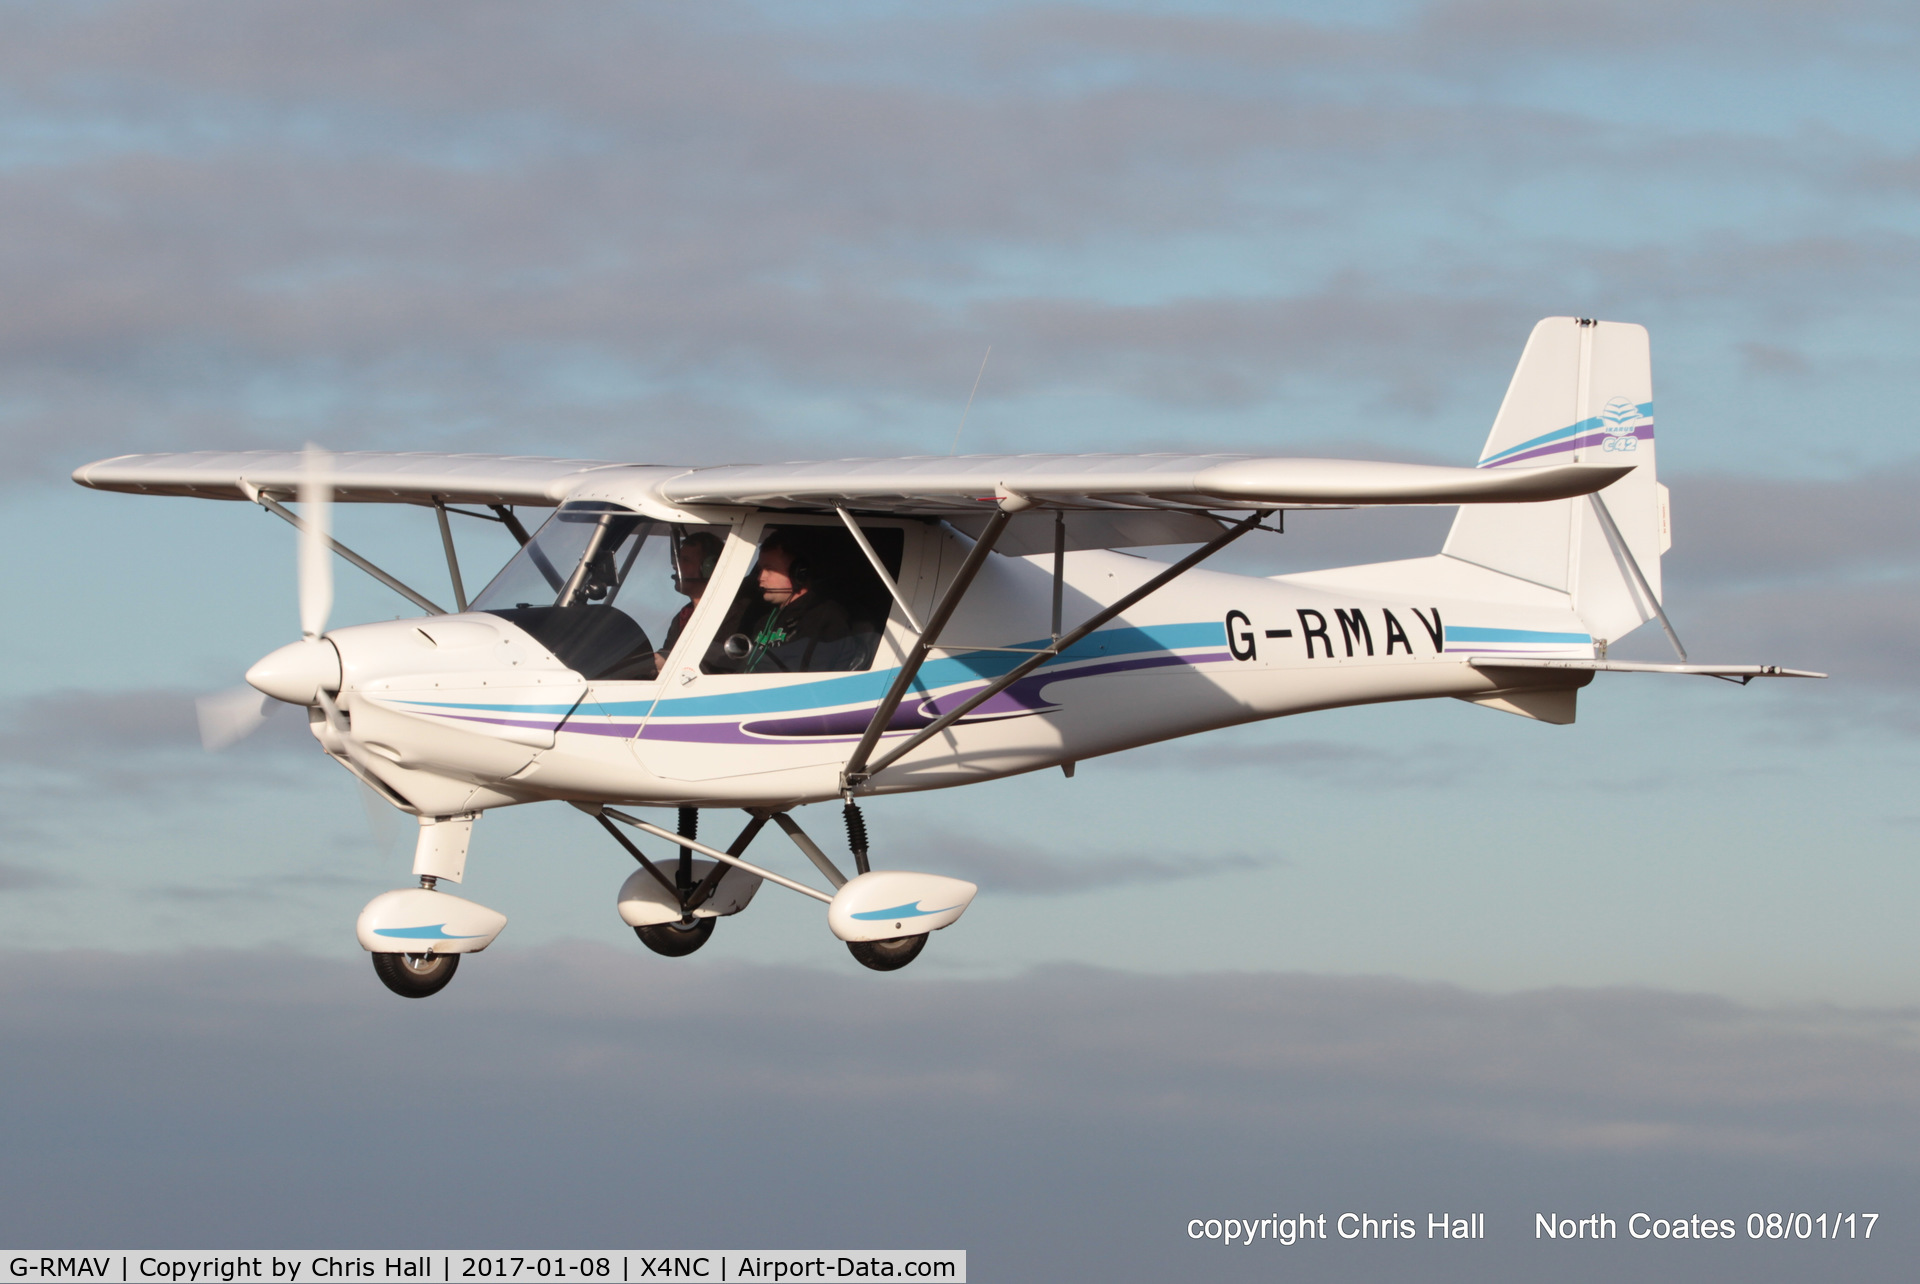 G-RMAV, 2015 Comco Ikarus C42 C/N 1502-7358, at the Brass Monkey fly in, North Coates